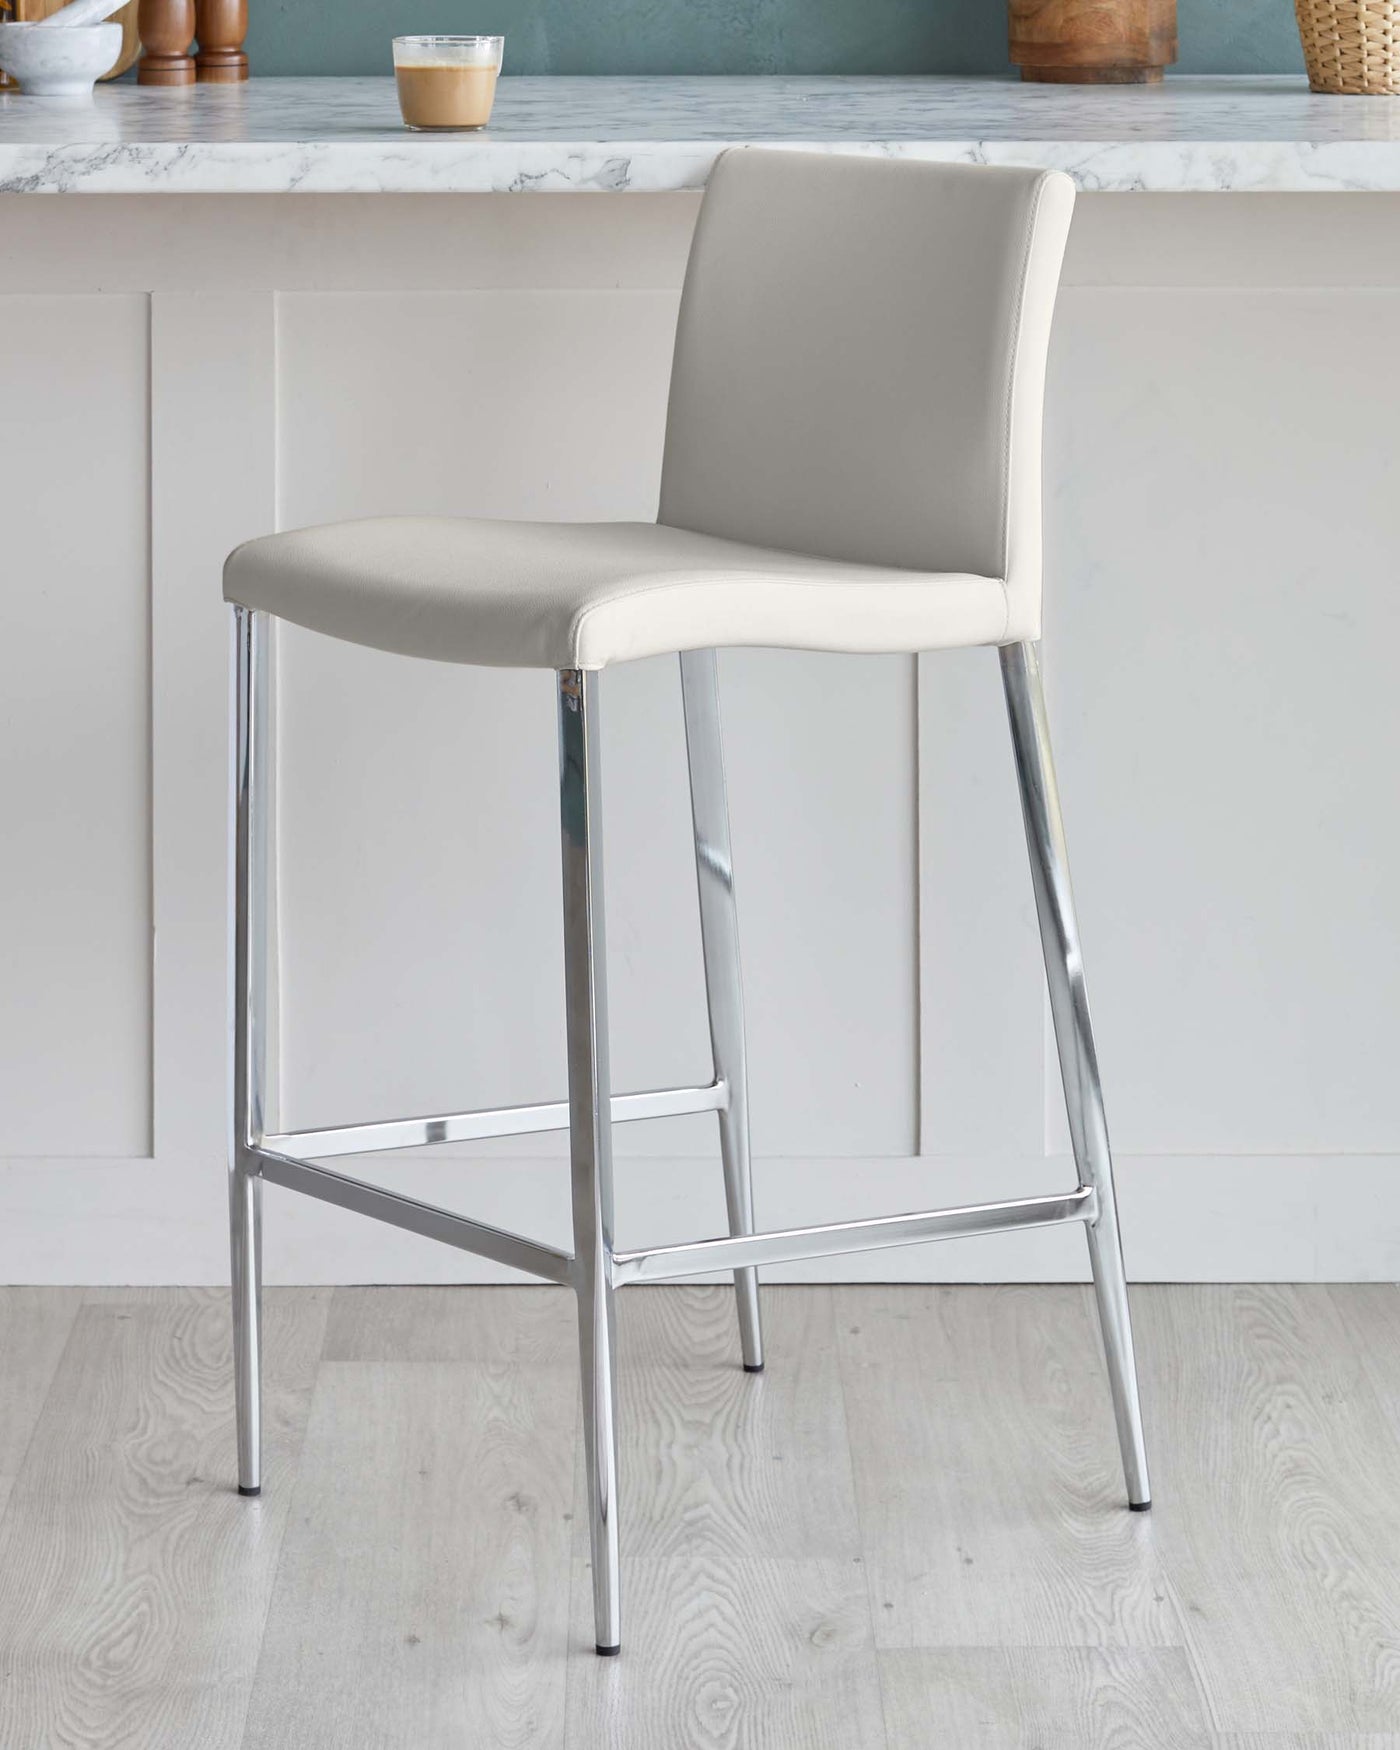 Modern bar stool with a sleek chrome frame and a taupe-coloured, upholstered seat and backrest.